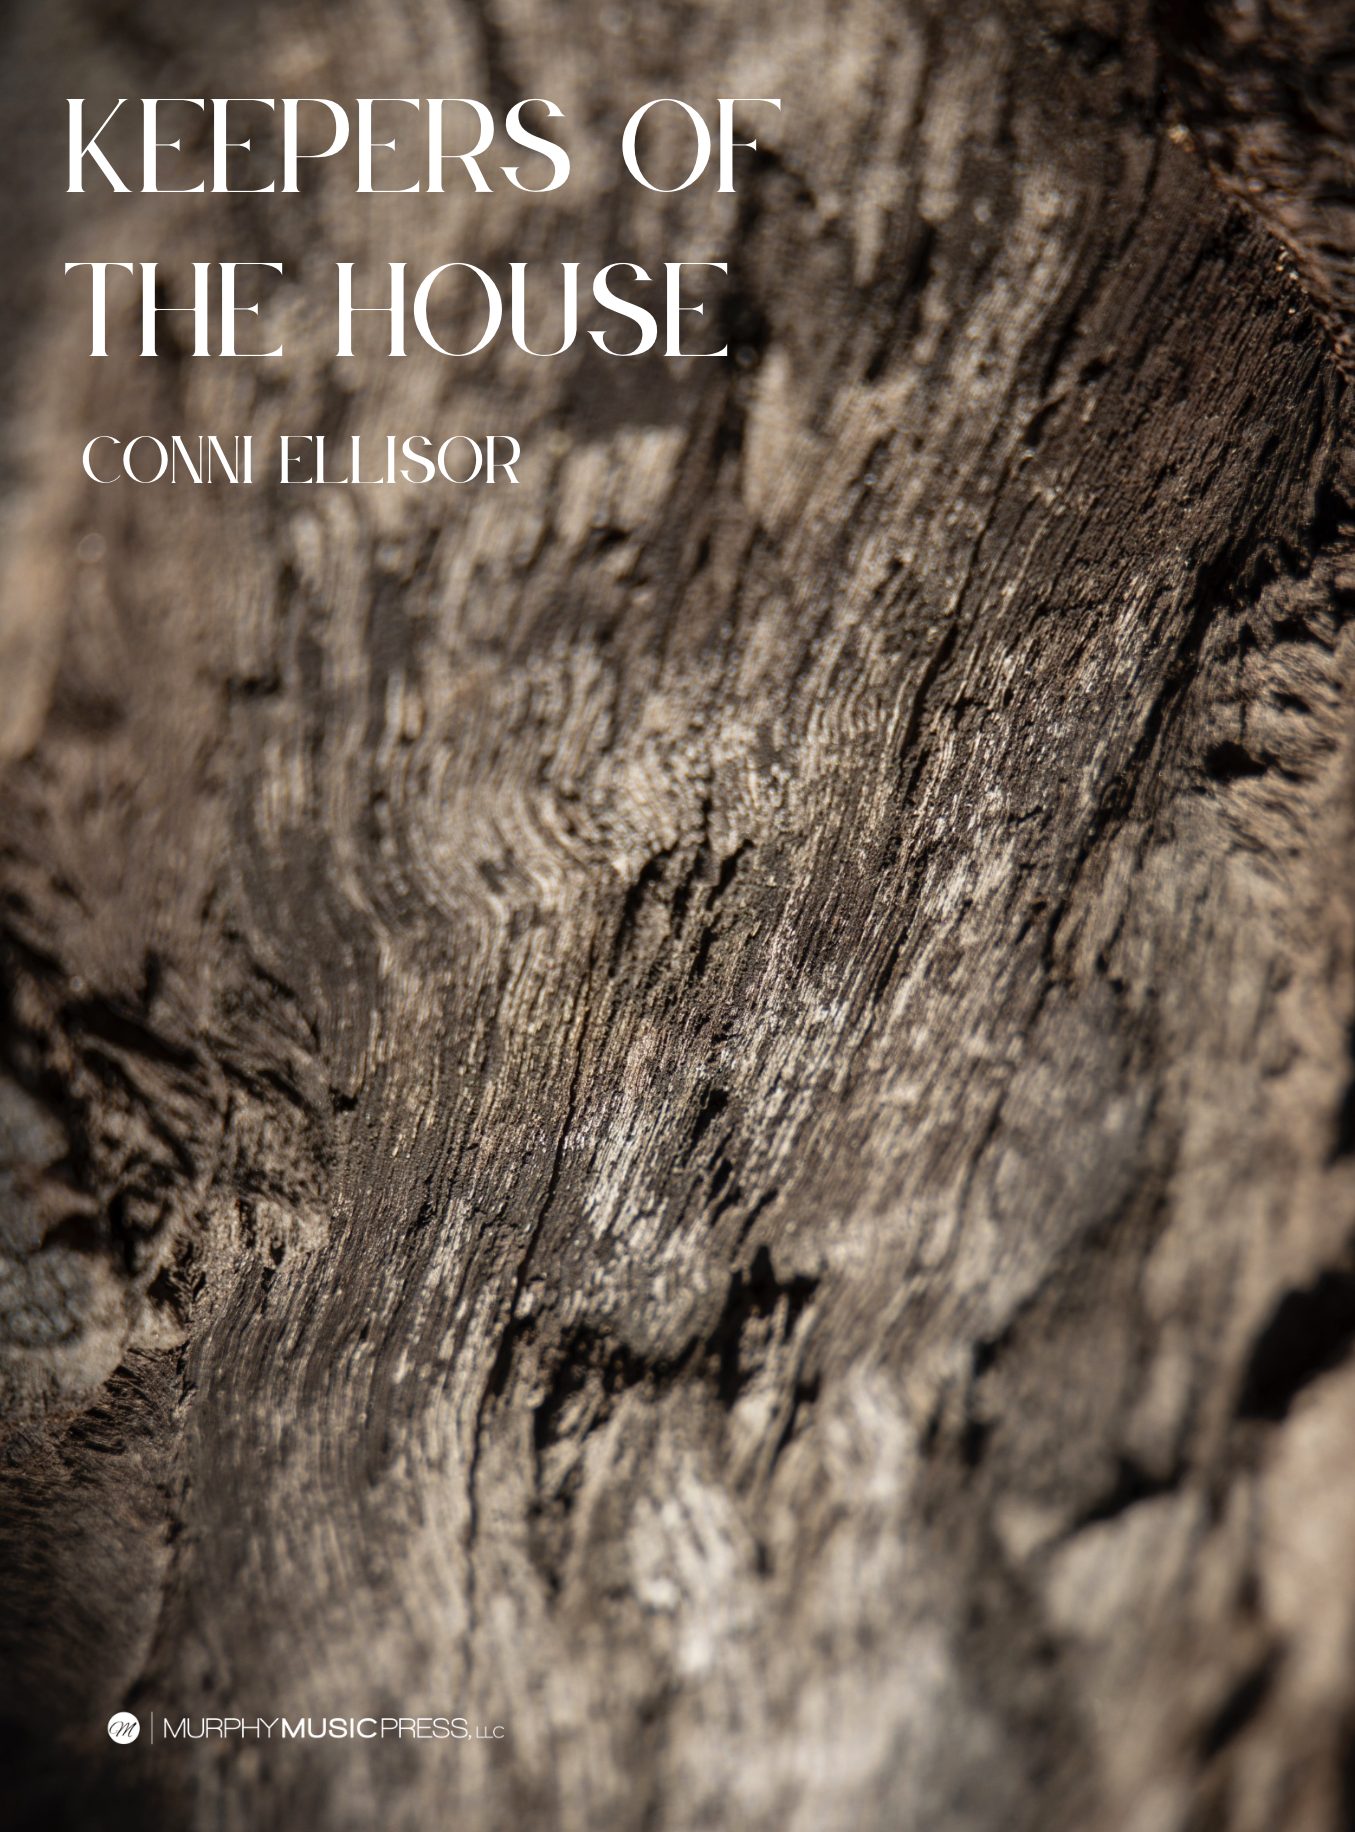 The Keepers Of The House by Conni Ellisor